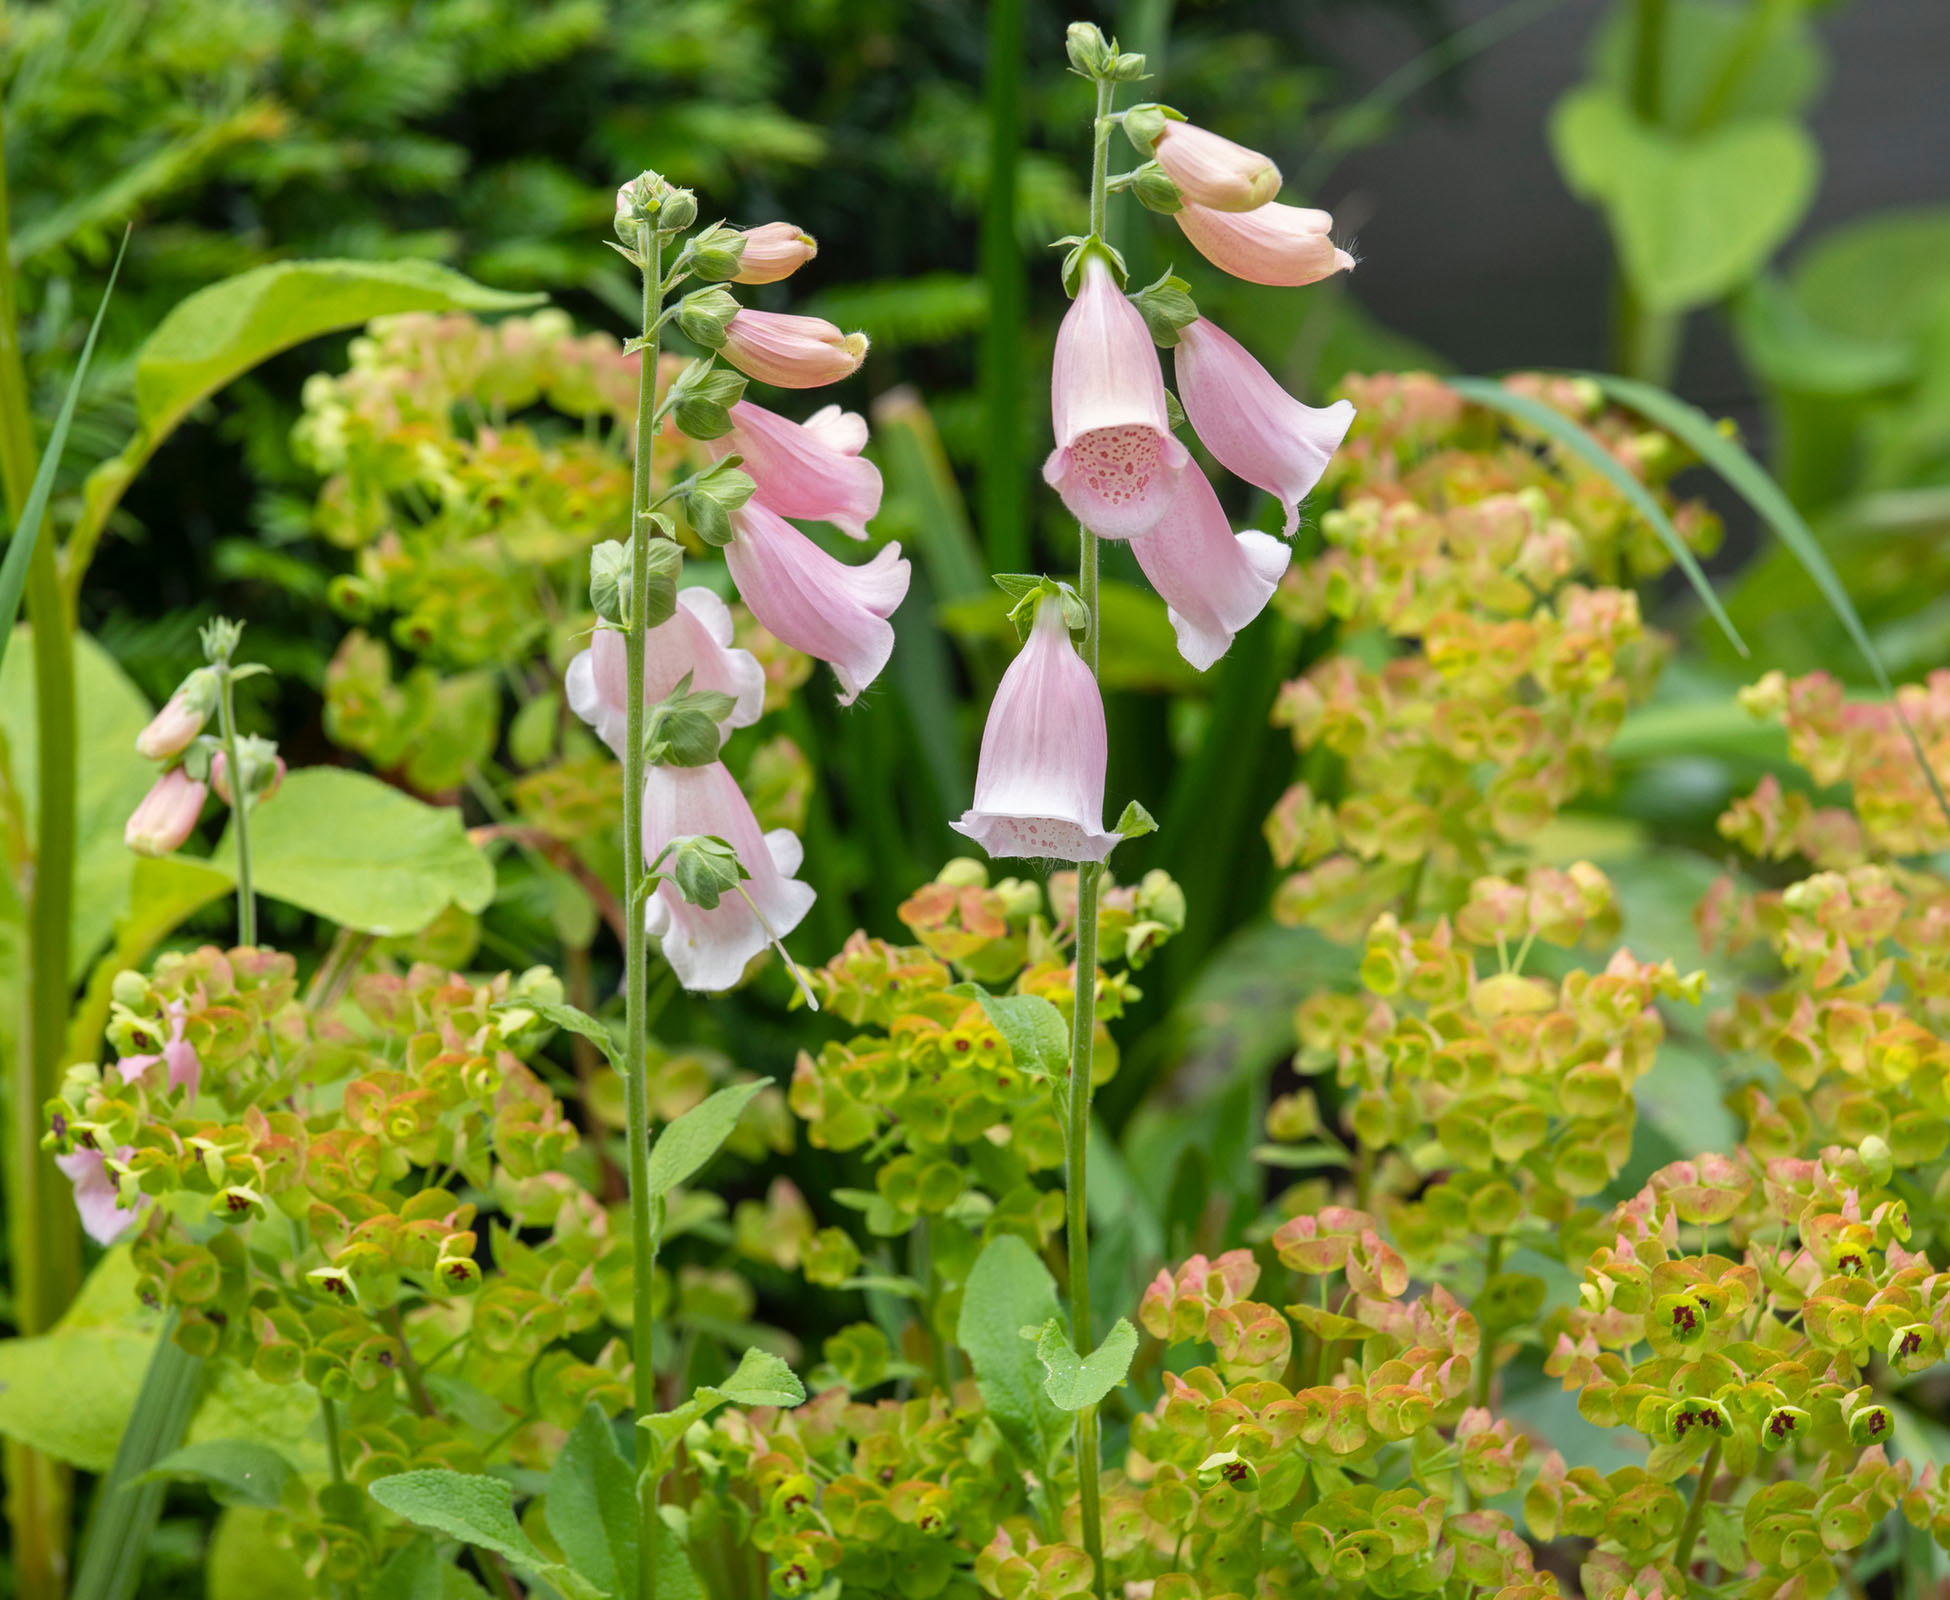 Euphorbia x Martinii and Digitalis Suttons Apricot provide pink hues and coppery shades in this Bounds Green Garden.